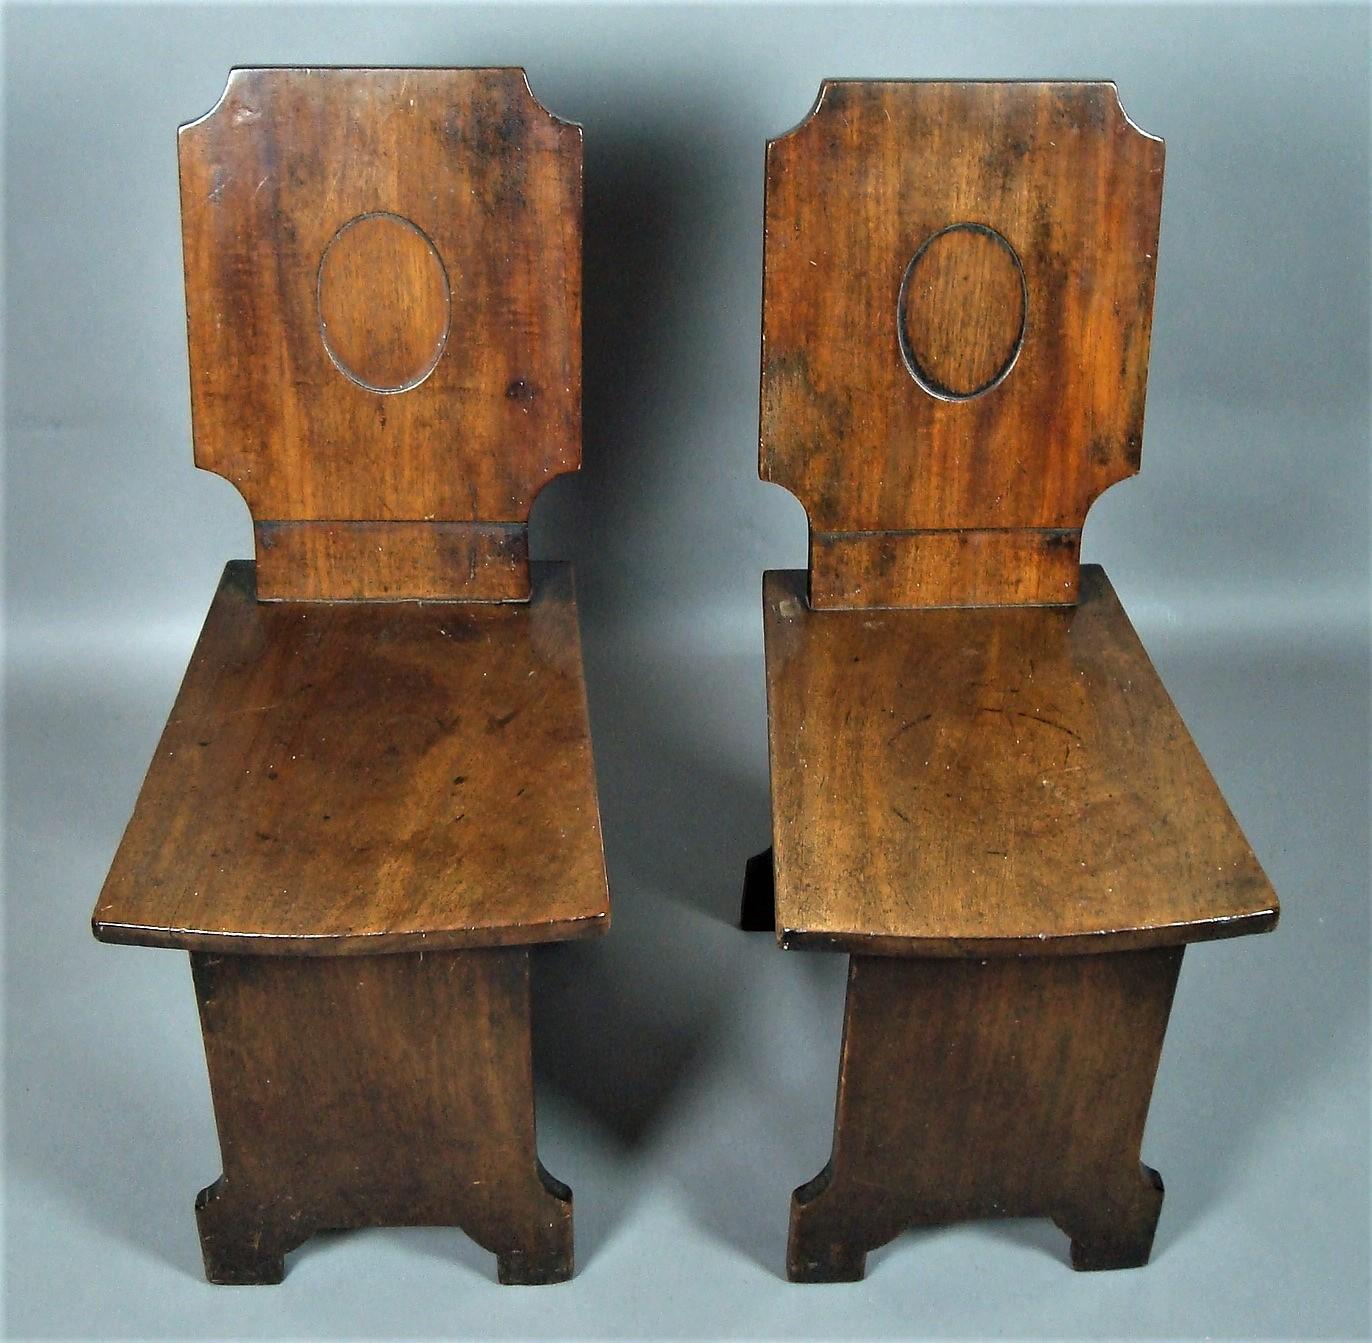 Regency pair of mahogany hall chairs, of very unusual restrained design; the tablet shaped backs incorporating dished oval panels, above a simple tapering seat of dished form, raised on slab supports with shaped feet united by a simple